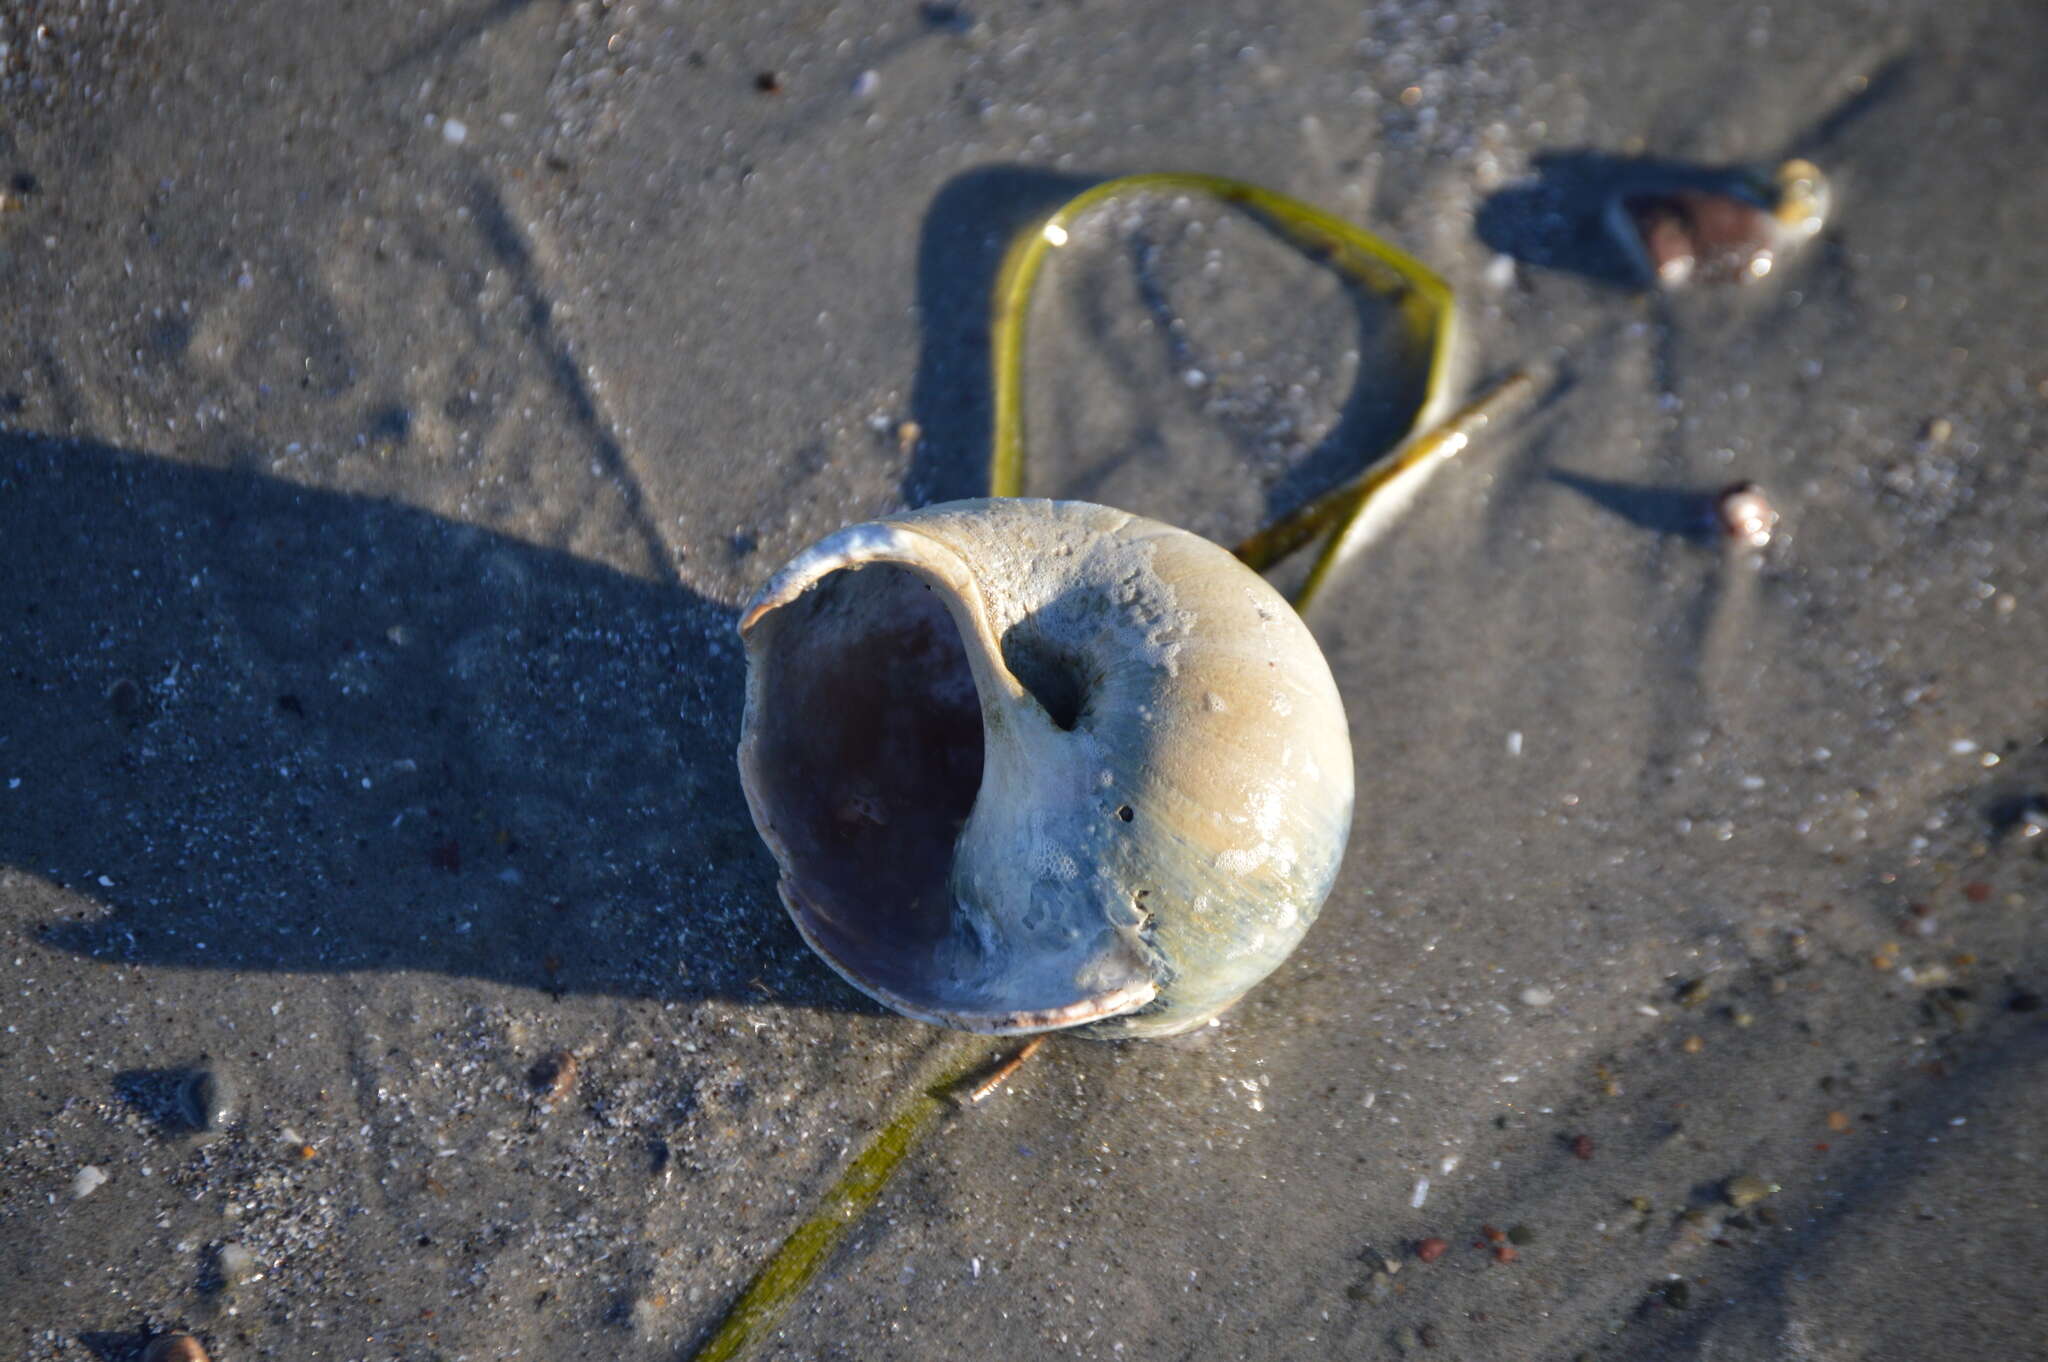 Image of common northern moonsnail